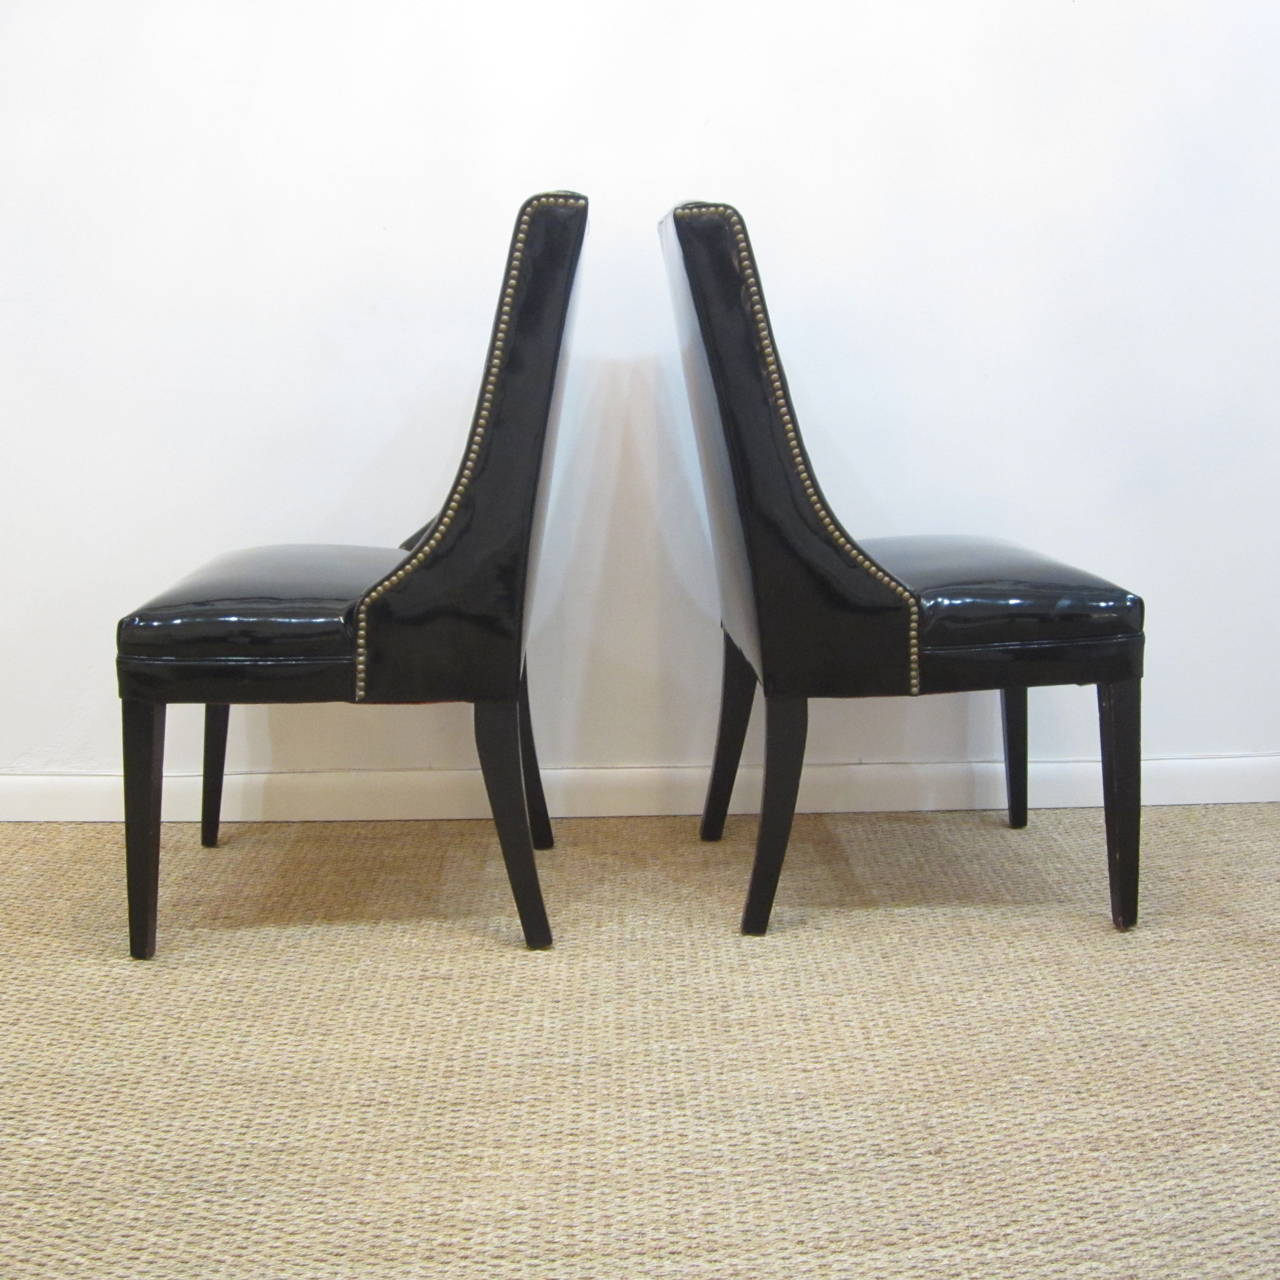 American Pair of Midcentury Side Chairs in Faux Leather with Brass Tacks For Sale